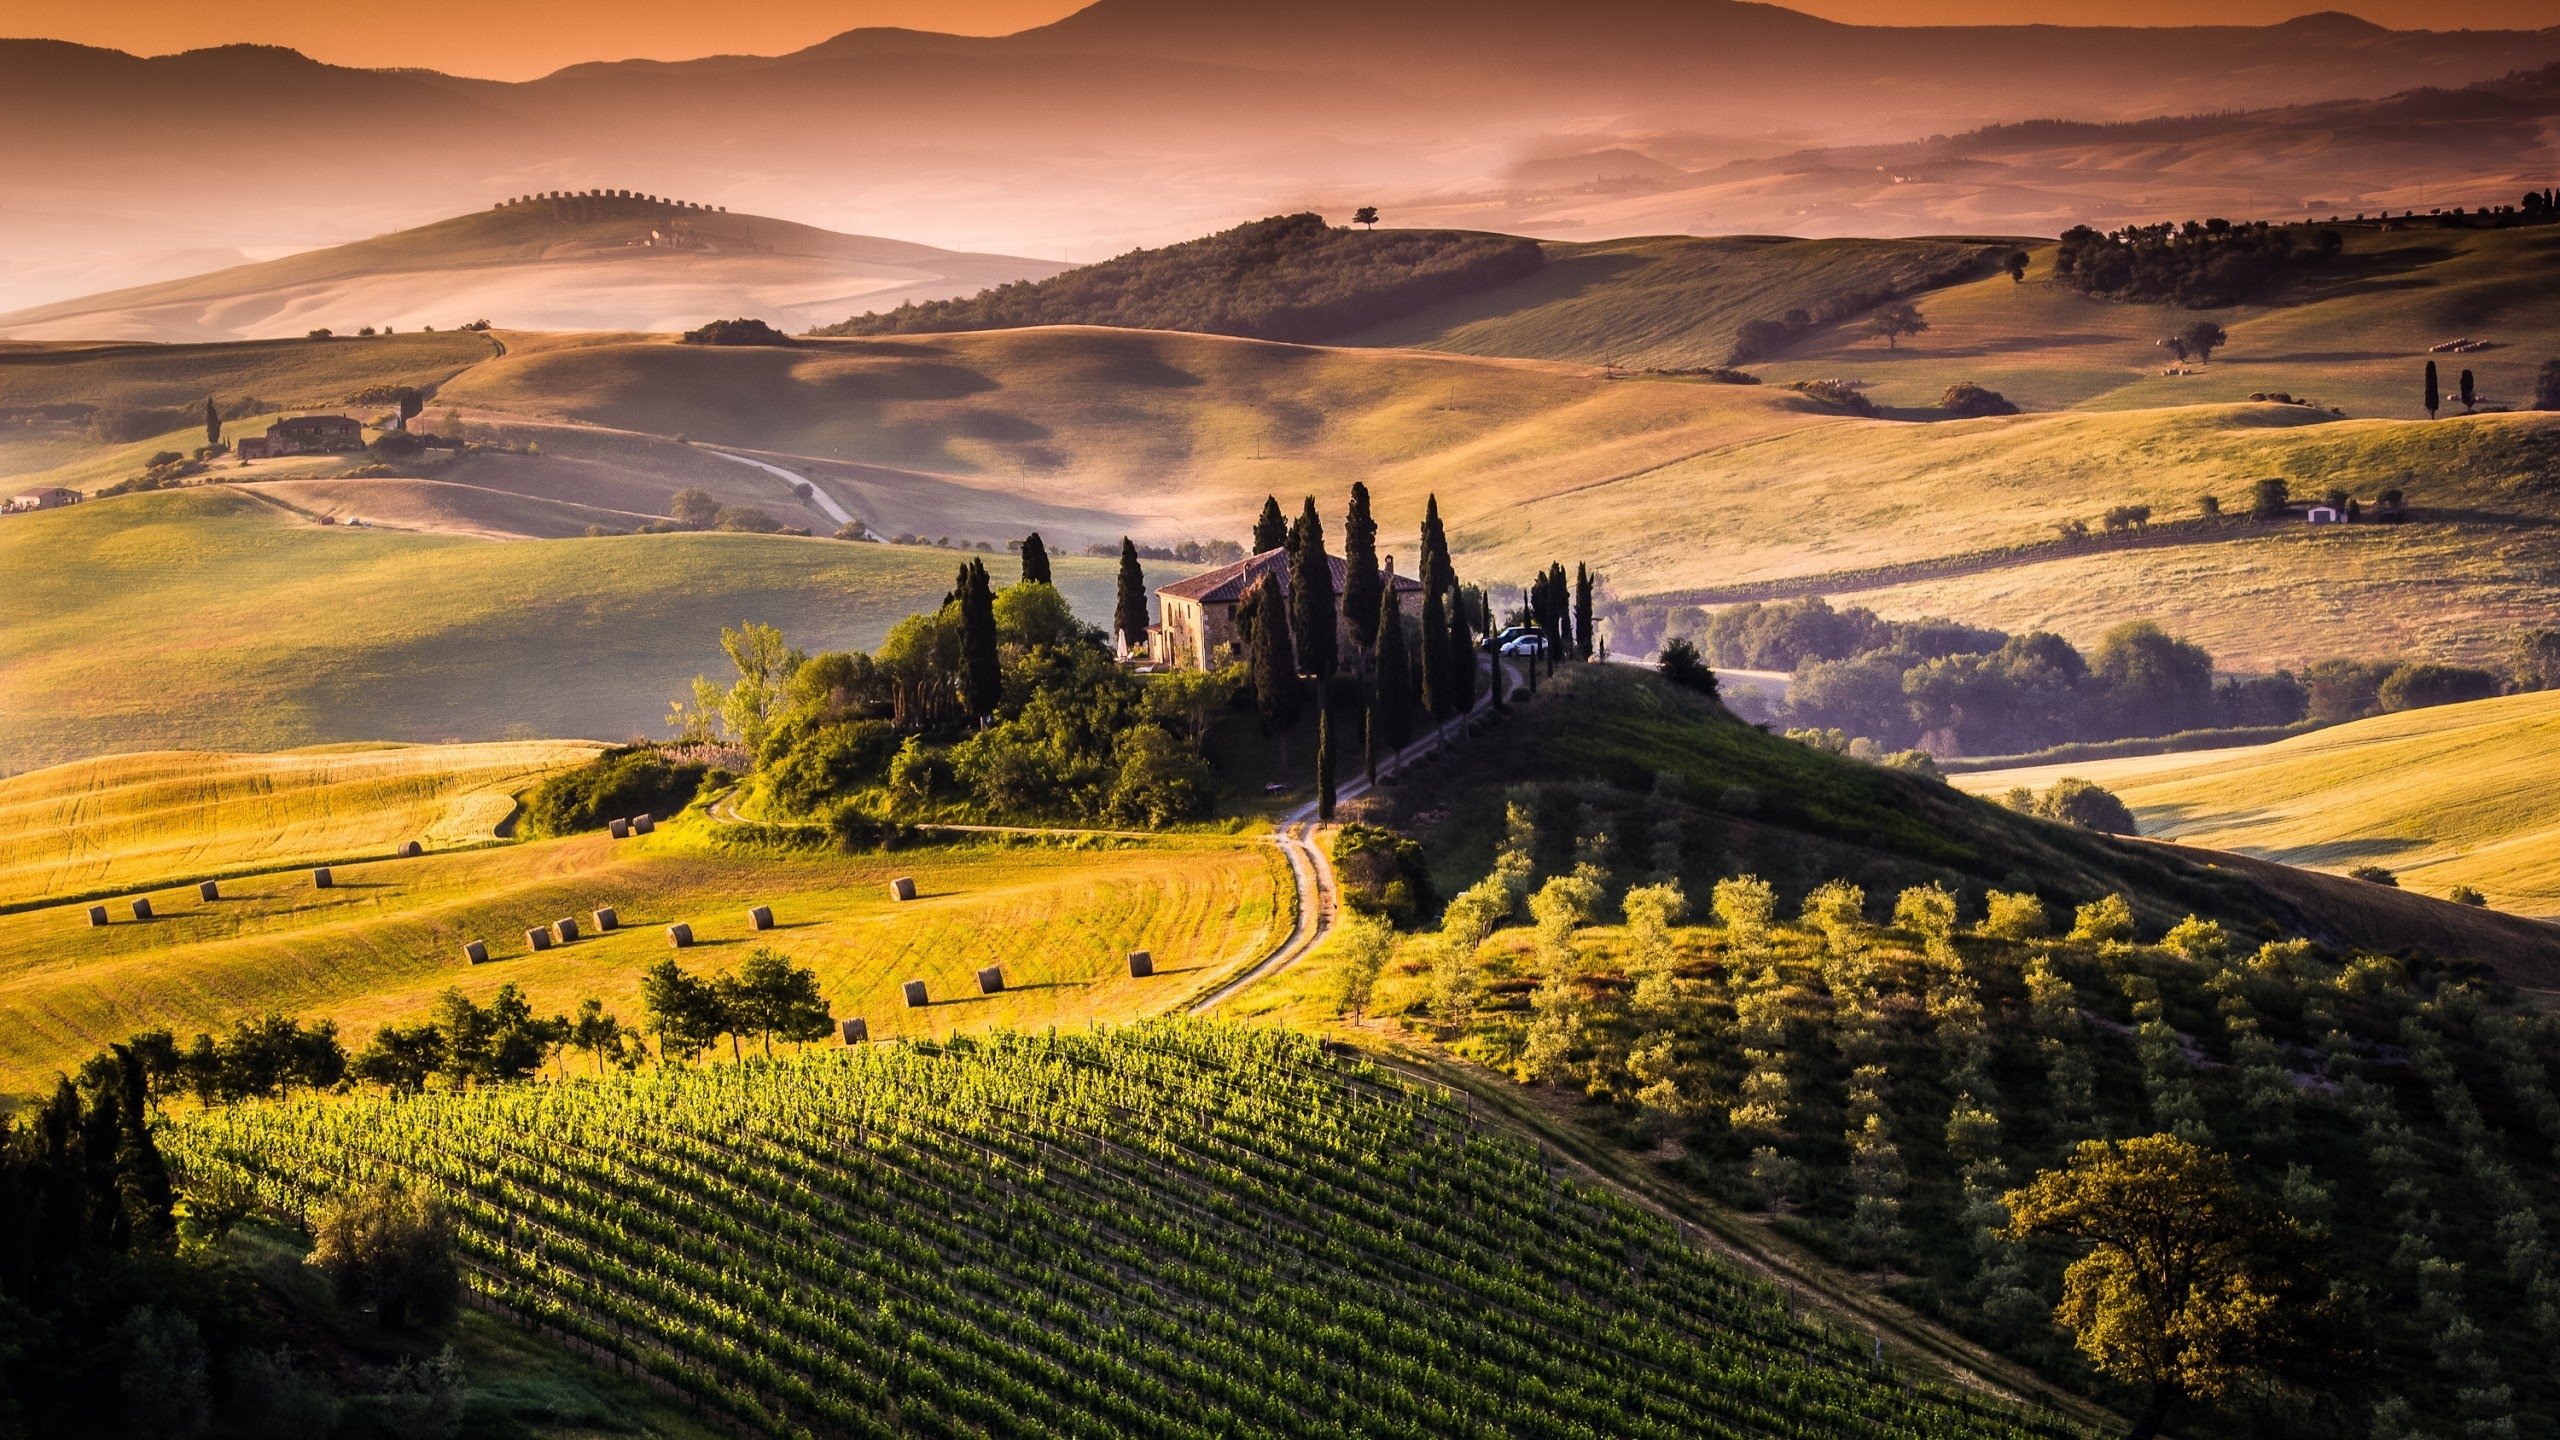 Amazing Tuscany View for 2560x1440 HDTV resolution